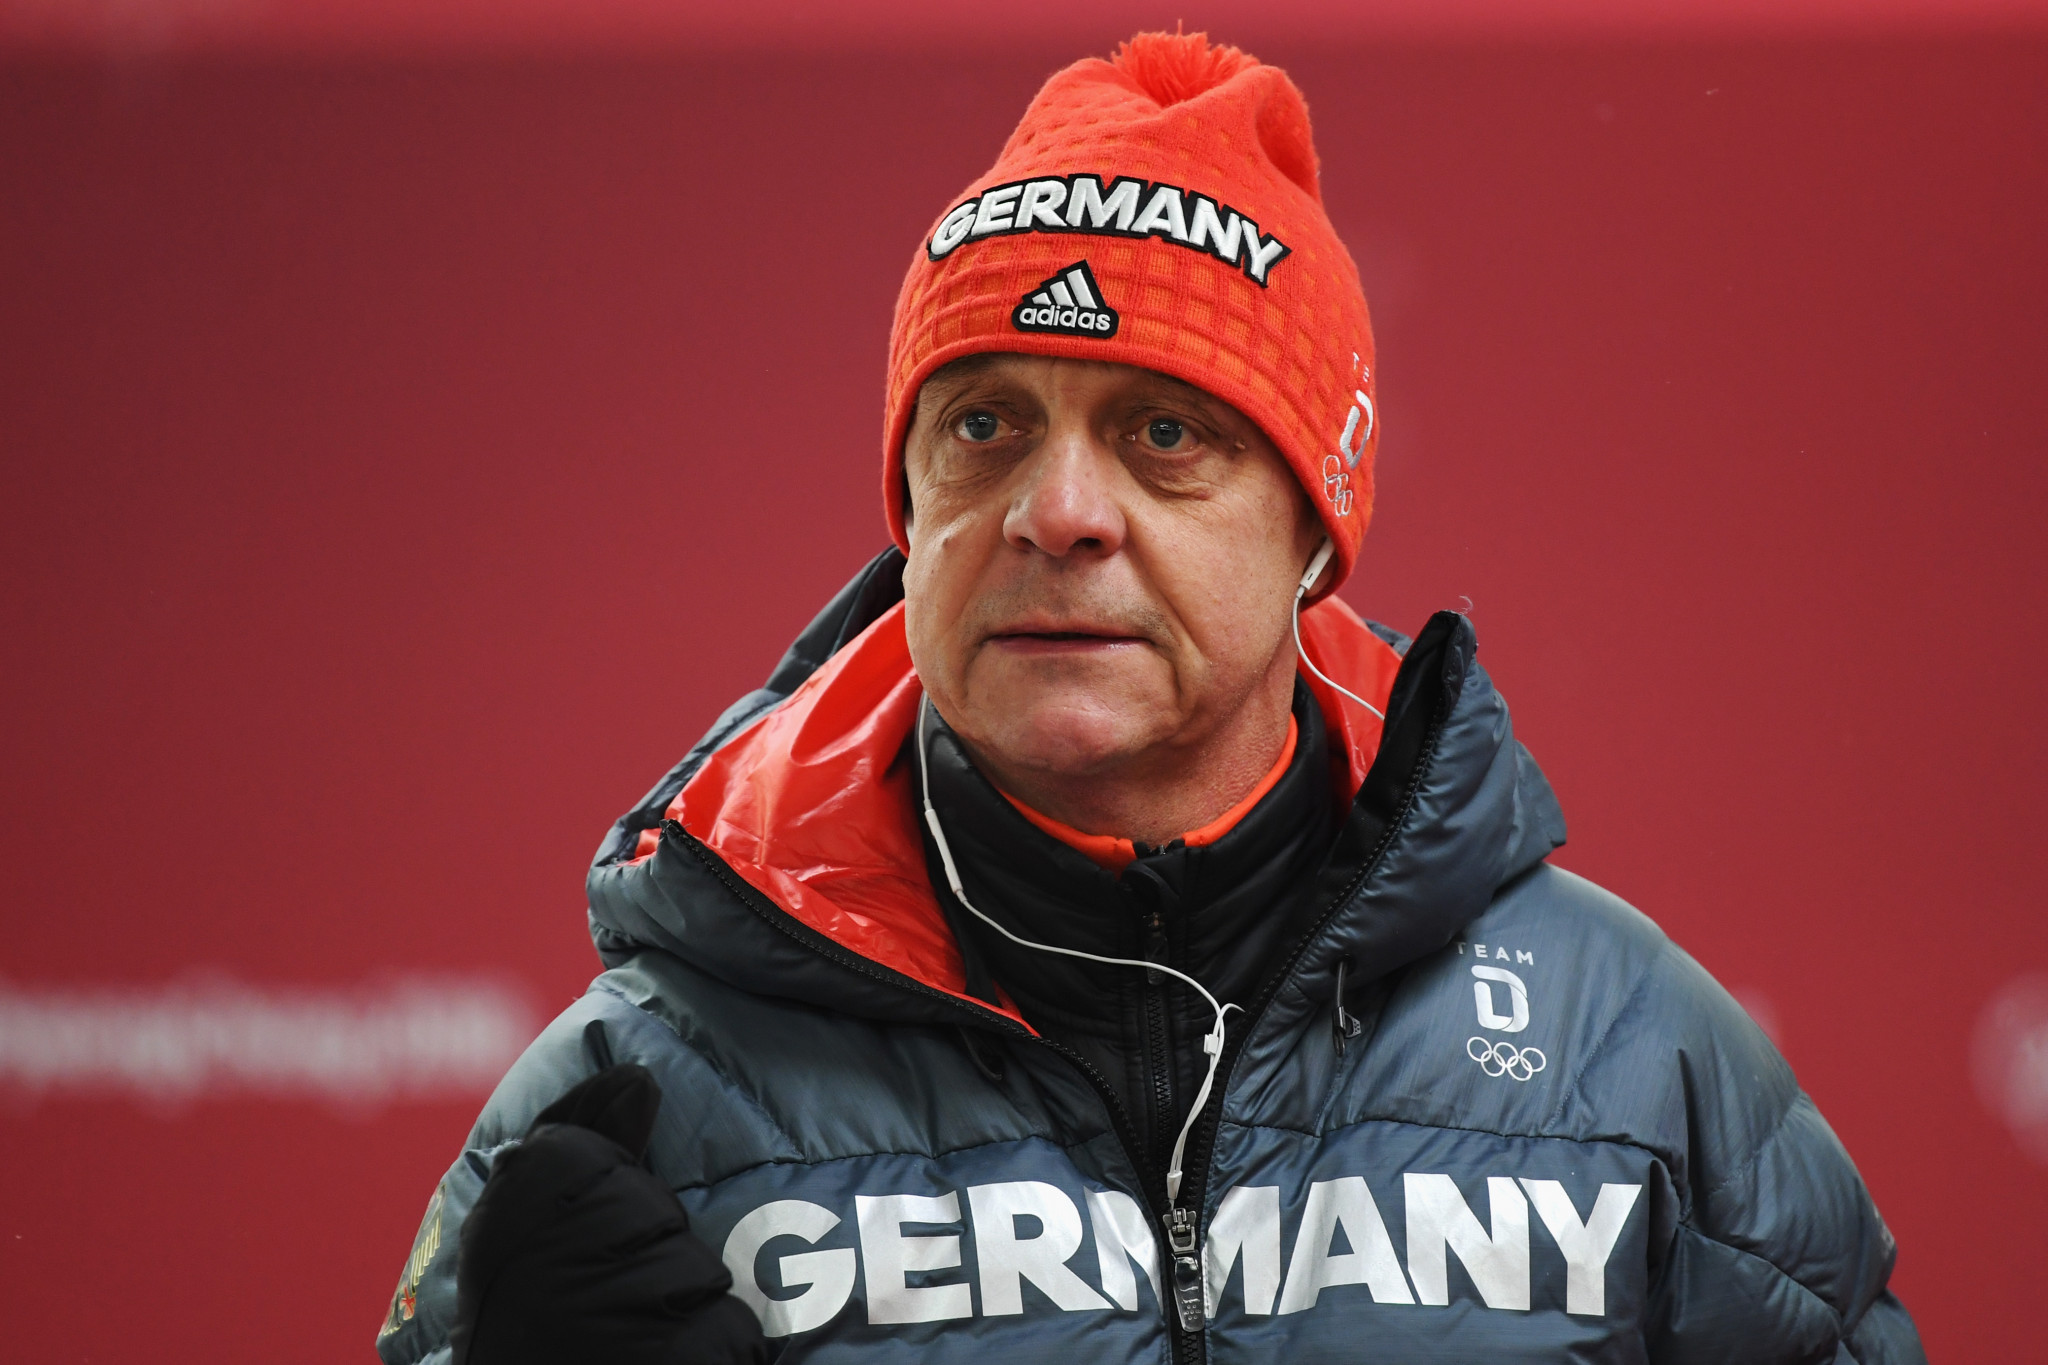 Coach of Germany's all-conquering luge team to stay on for Milan Cortina 2026